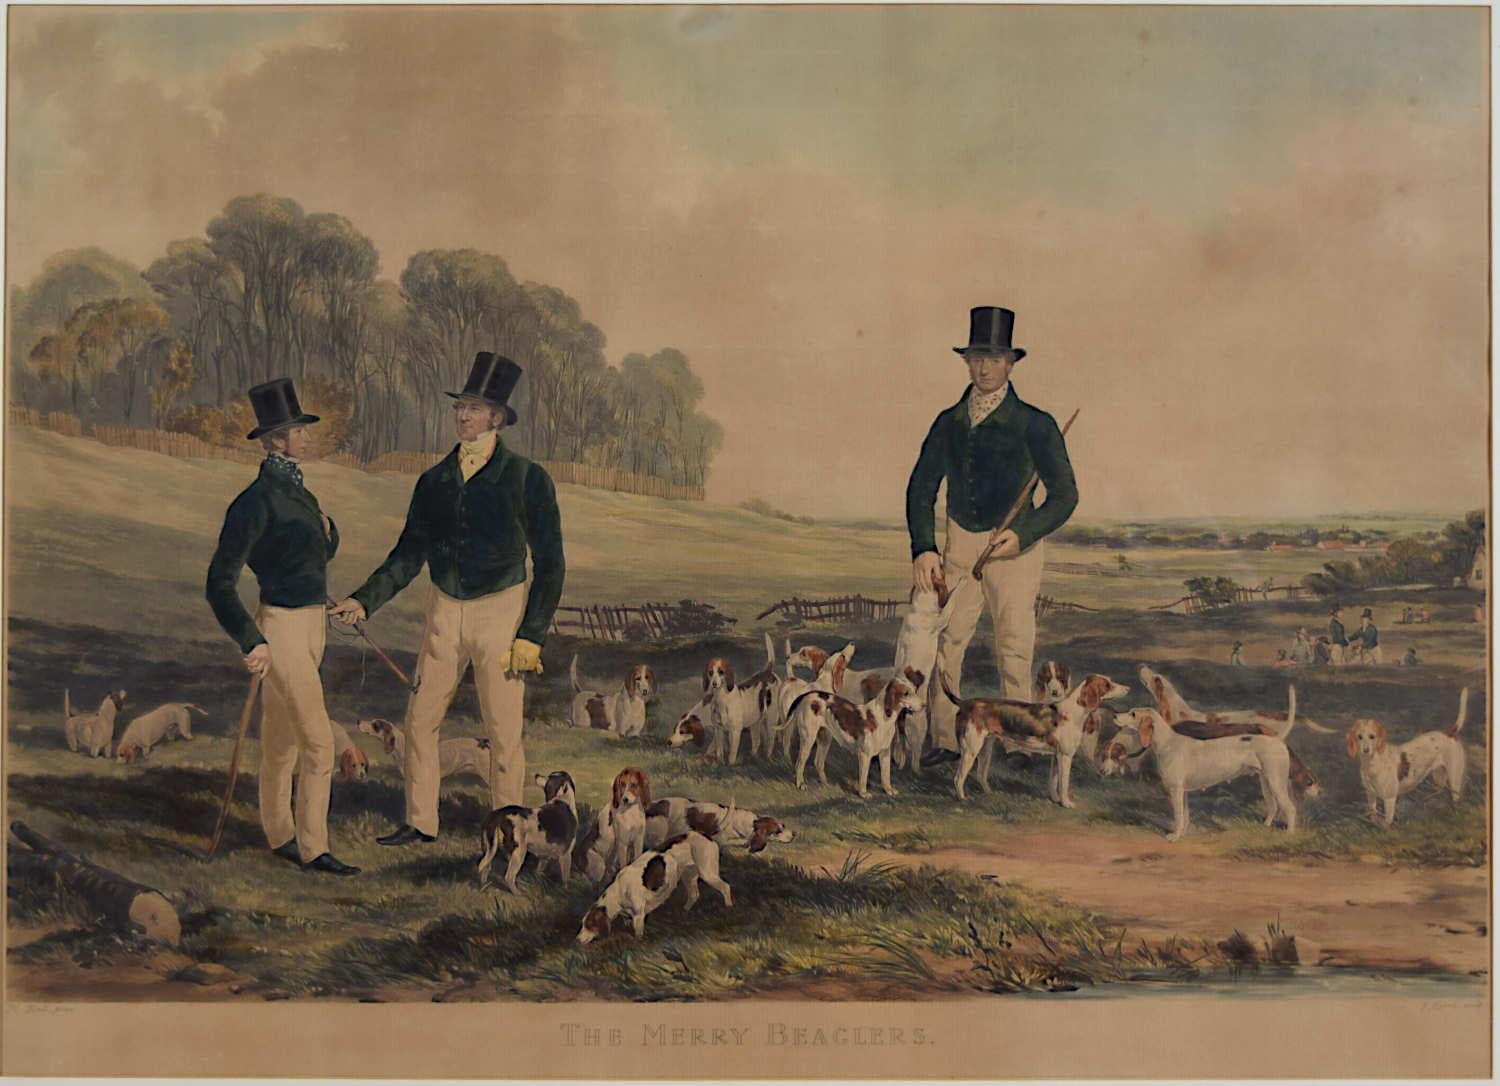 John Harris the Younger Landscape Print - The Merry Beaglers engraving by John Harris after Harry Hall's 1845 painting